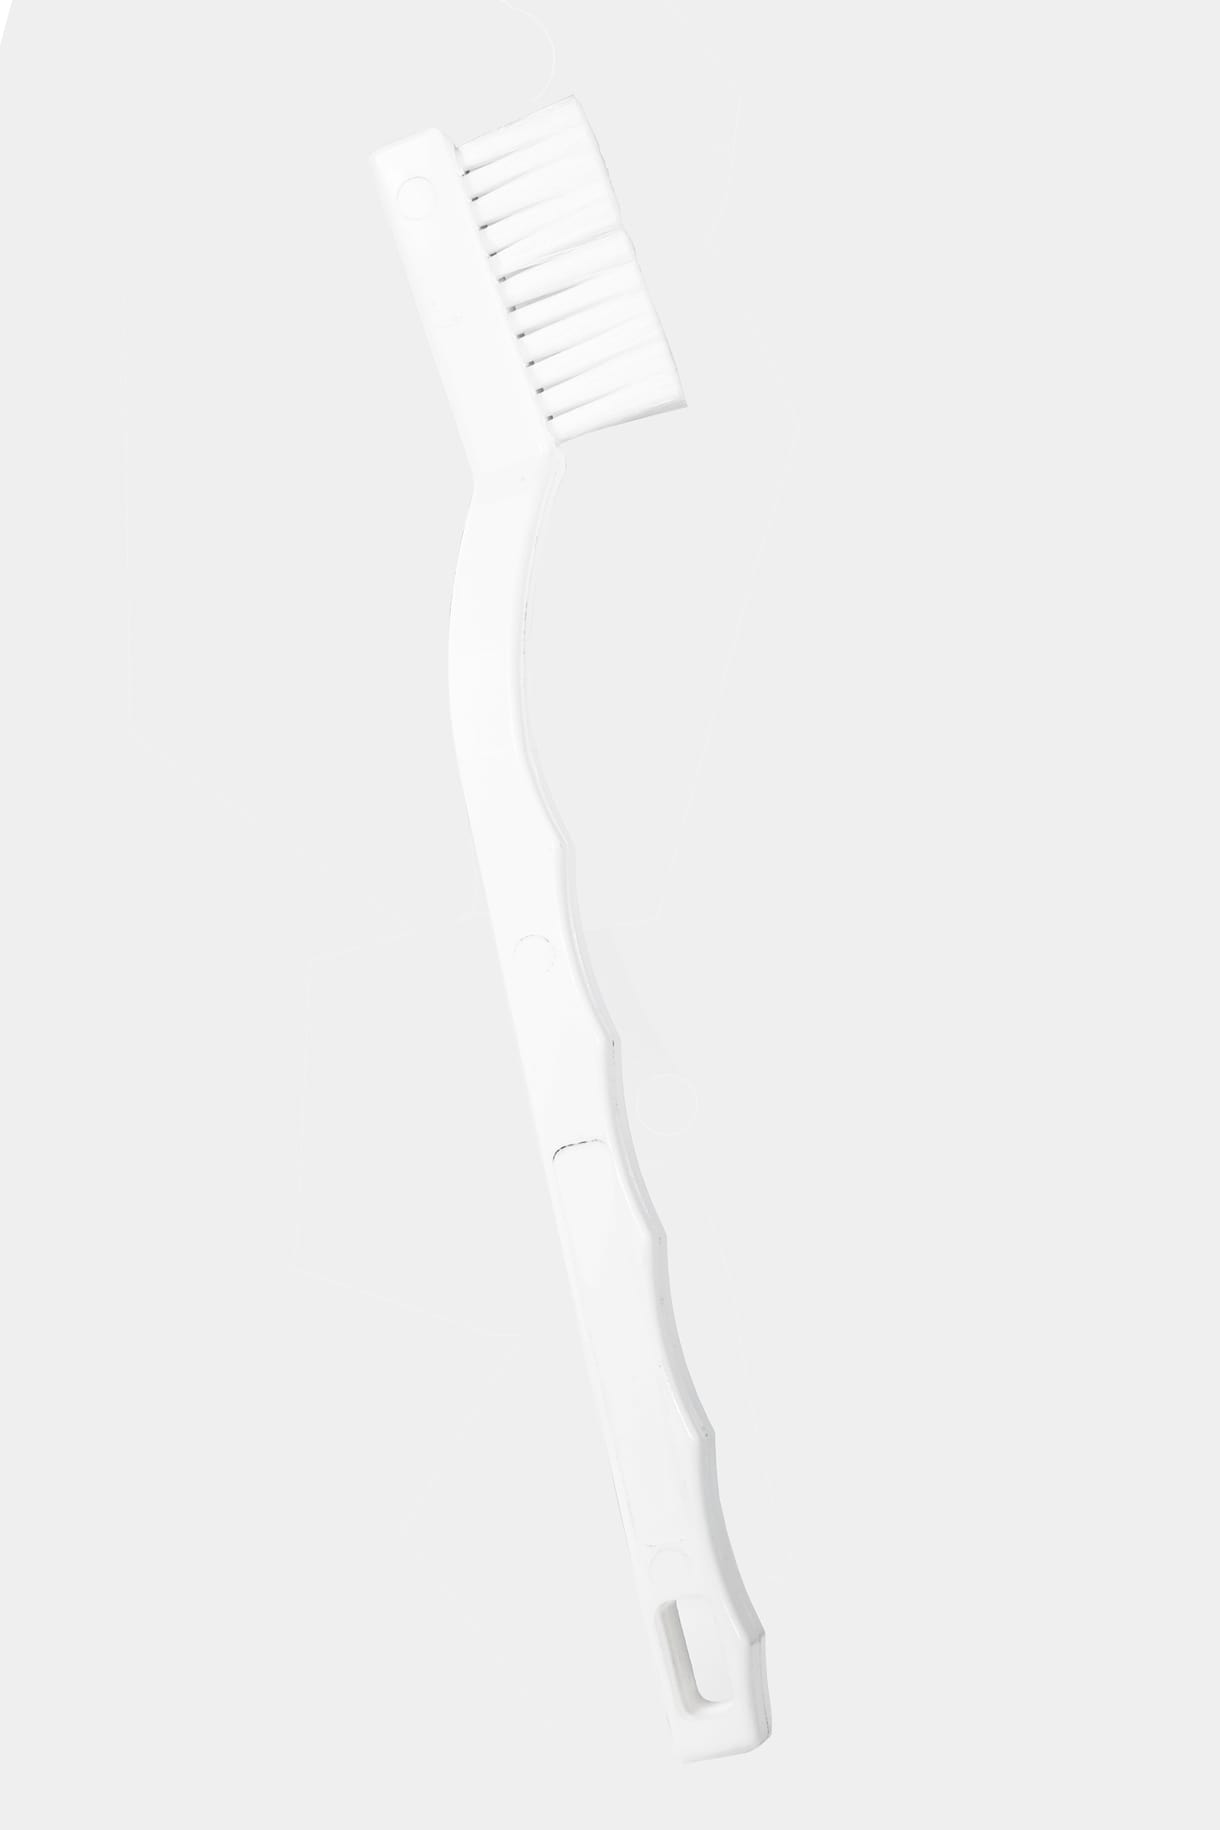 Extra Soft Toothbrush,Ultra SoftBristled Toothbrush Toothbrush Soft  Toothbrush Toothbrush Crafted with Care 